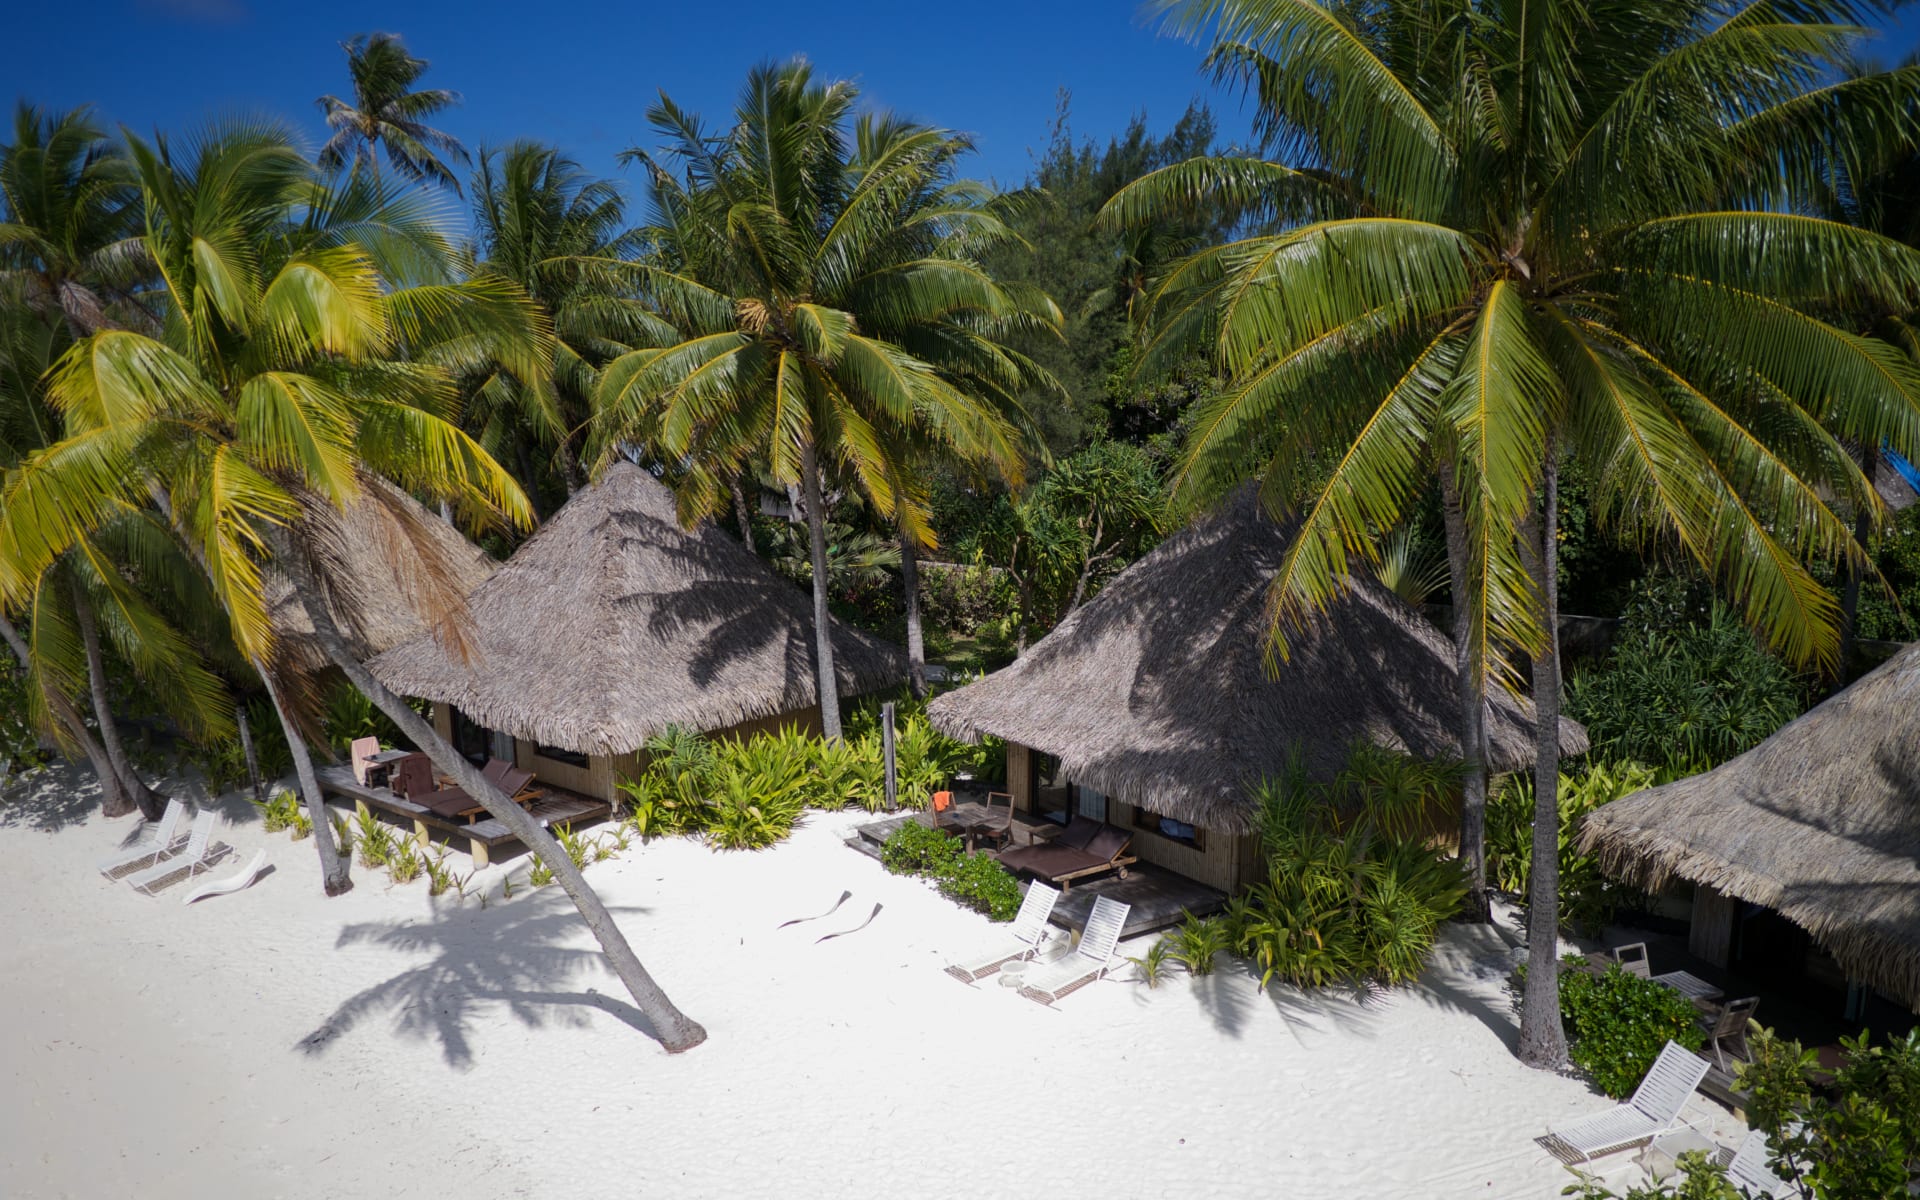 Thatched-roof villas are surrounded by palm trees and a white beach.